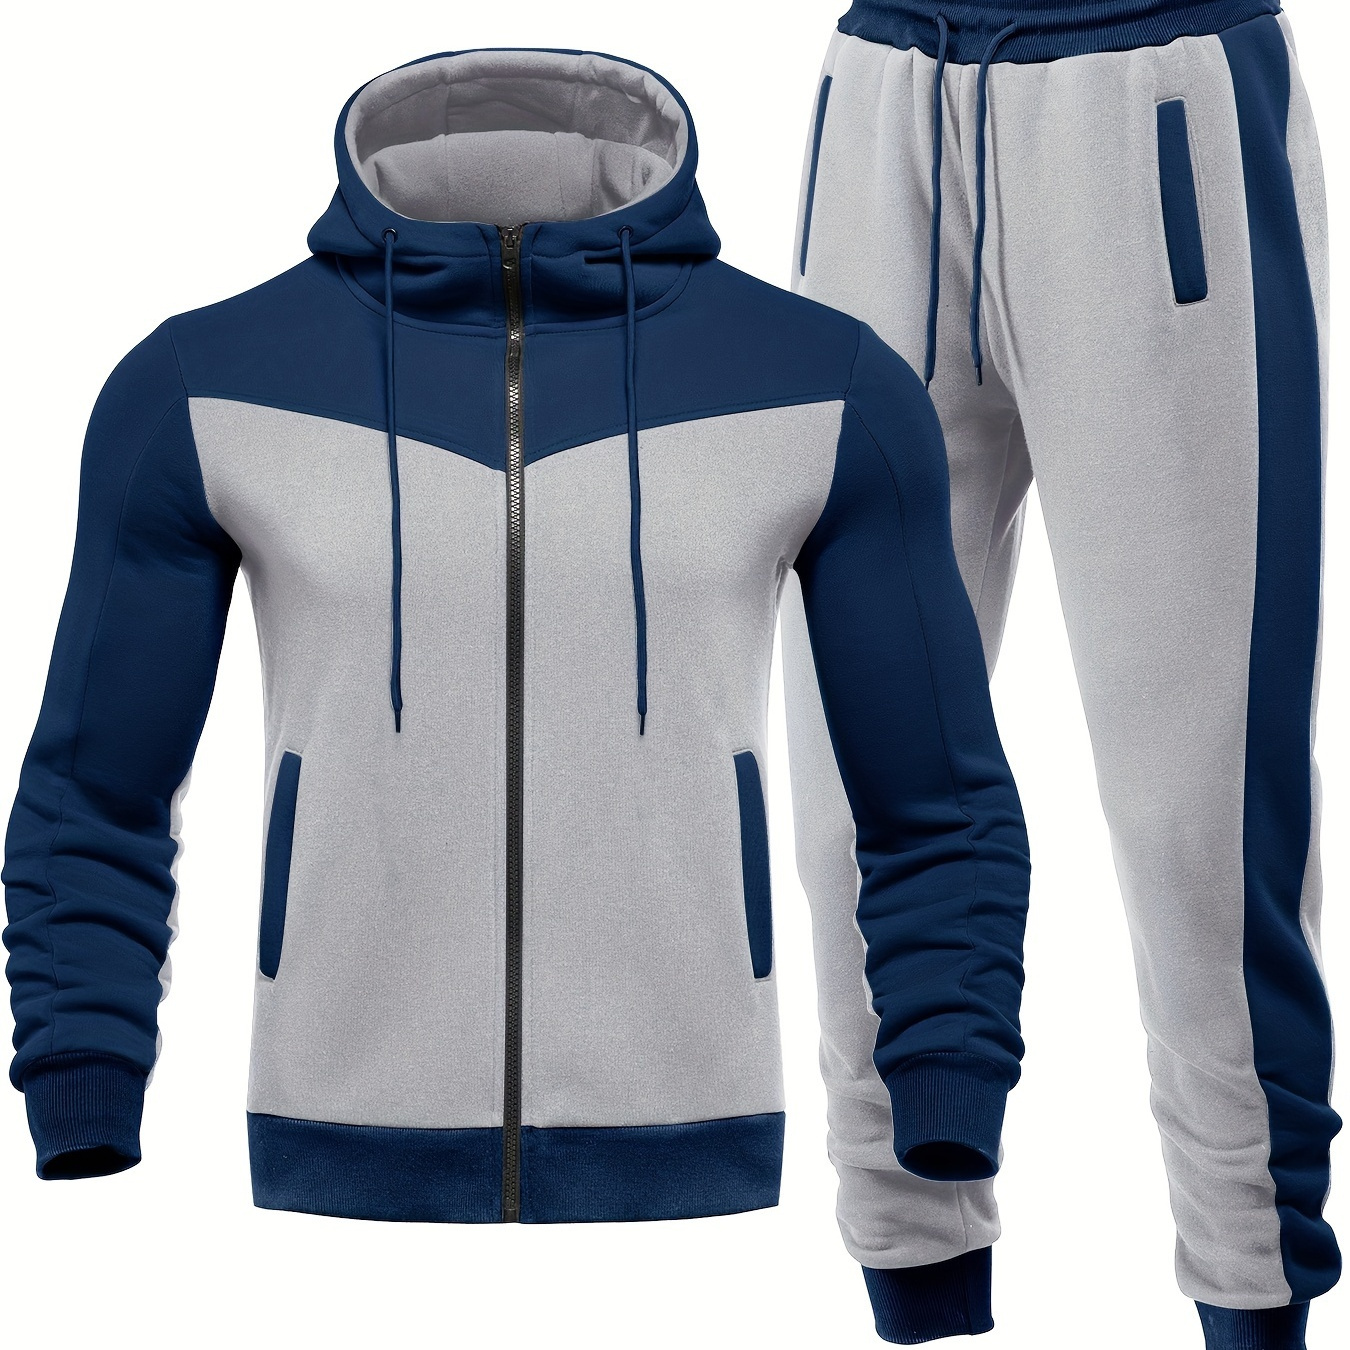 

Men's Casual Sportswear Hoodie Set, Two-piece With Color Block Design, Zip-up Drawstring Jogging Suit For All Seasons